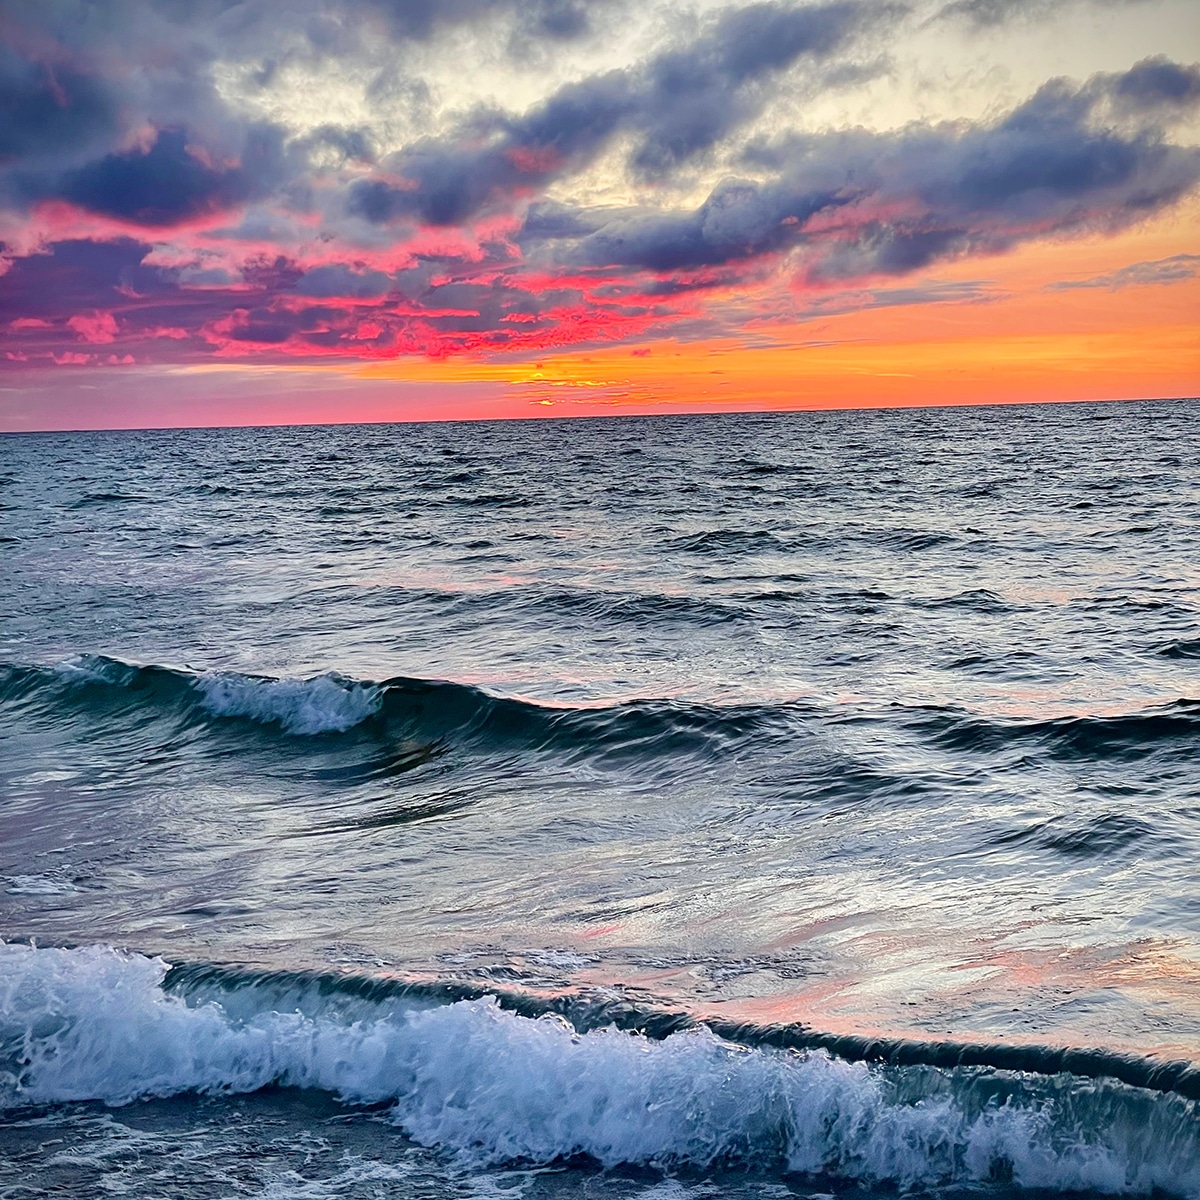 A brilliant sunset over the water of Lake Michigan in Petoskey.